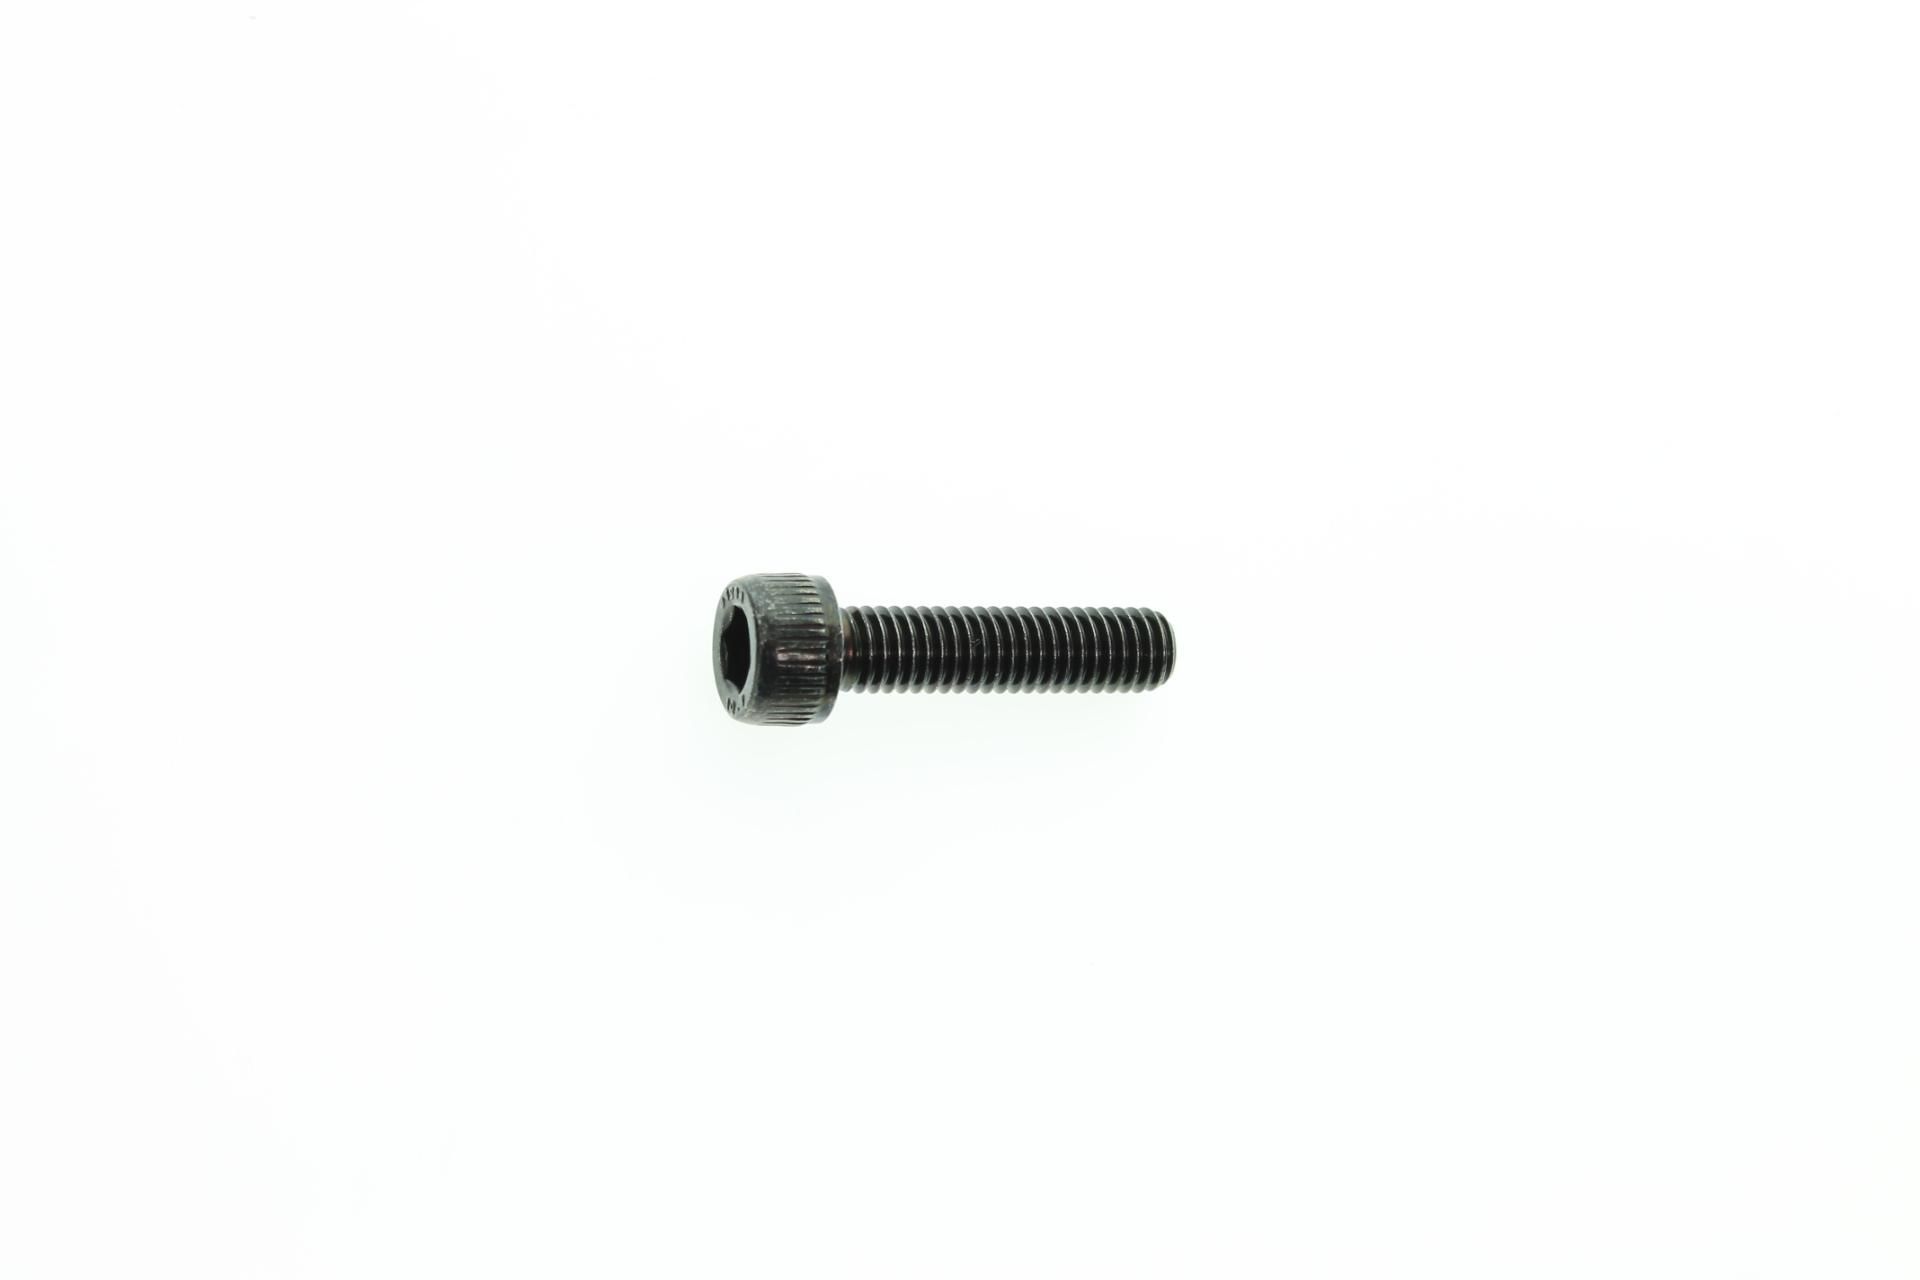 Superseded by 91317-06025-00 - BOLT (4MY)